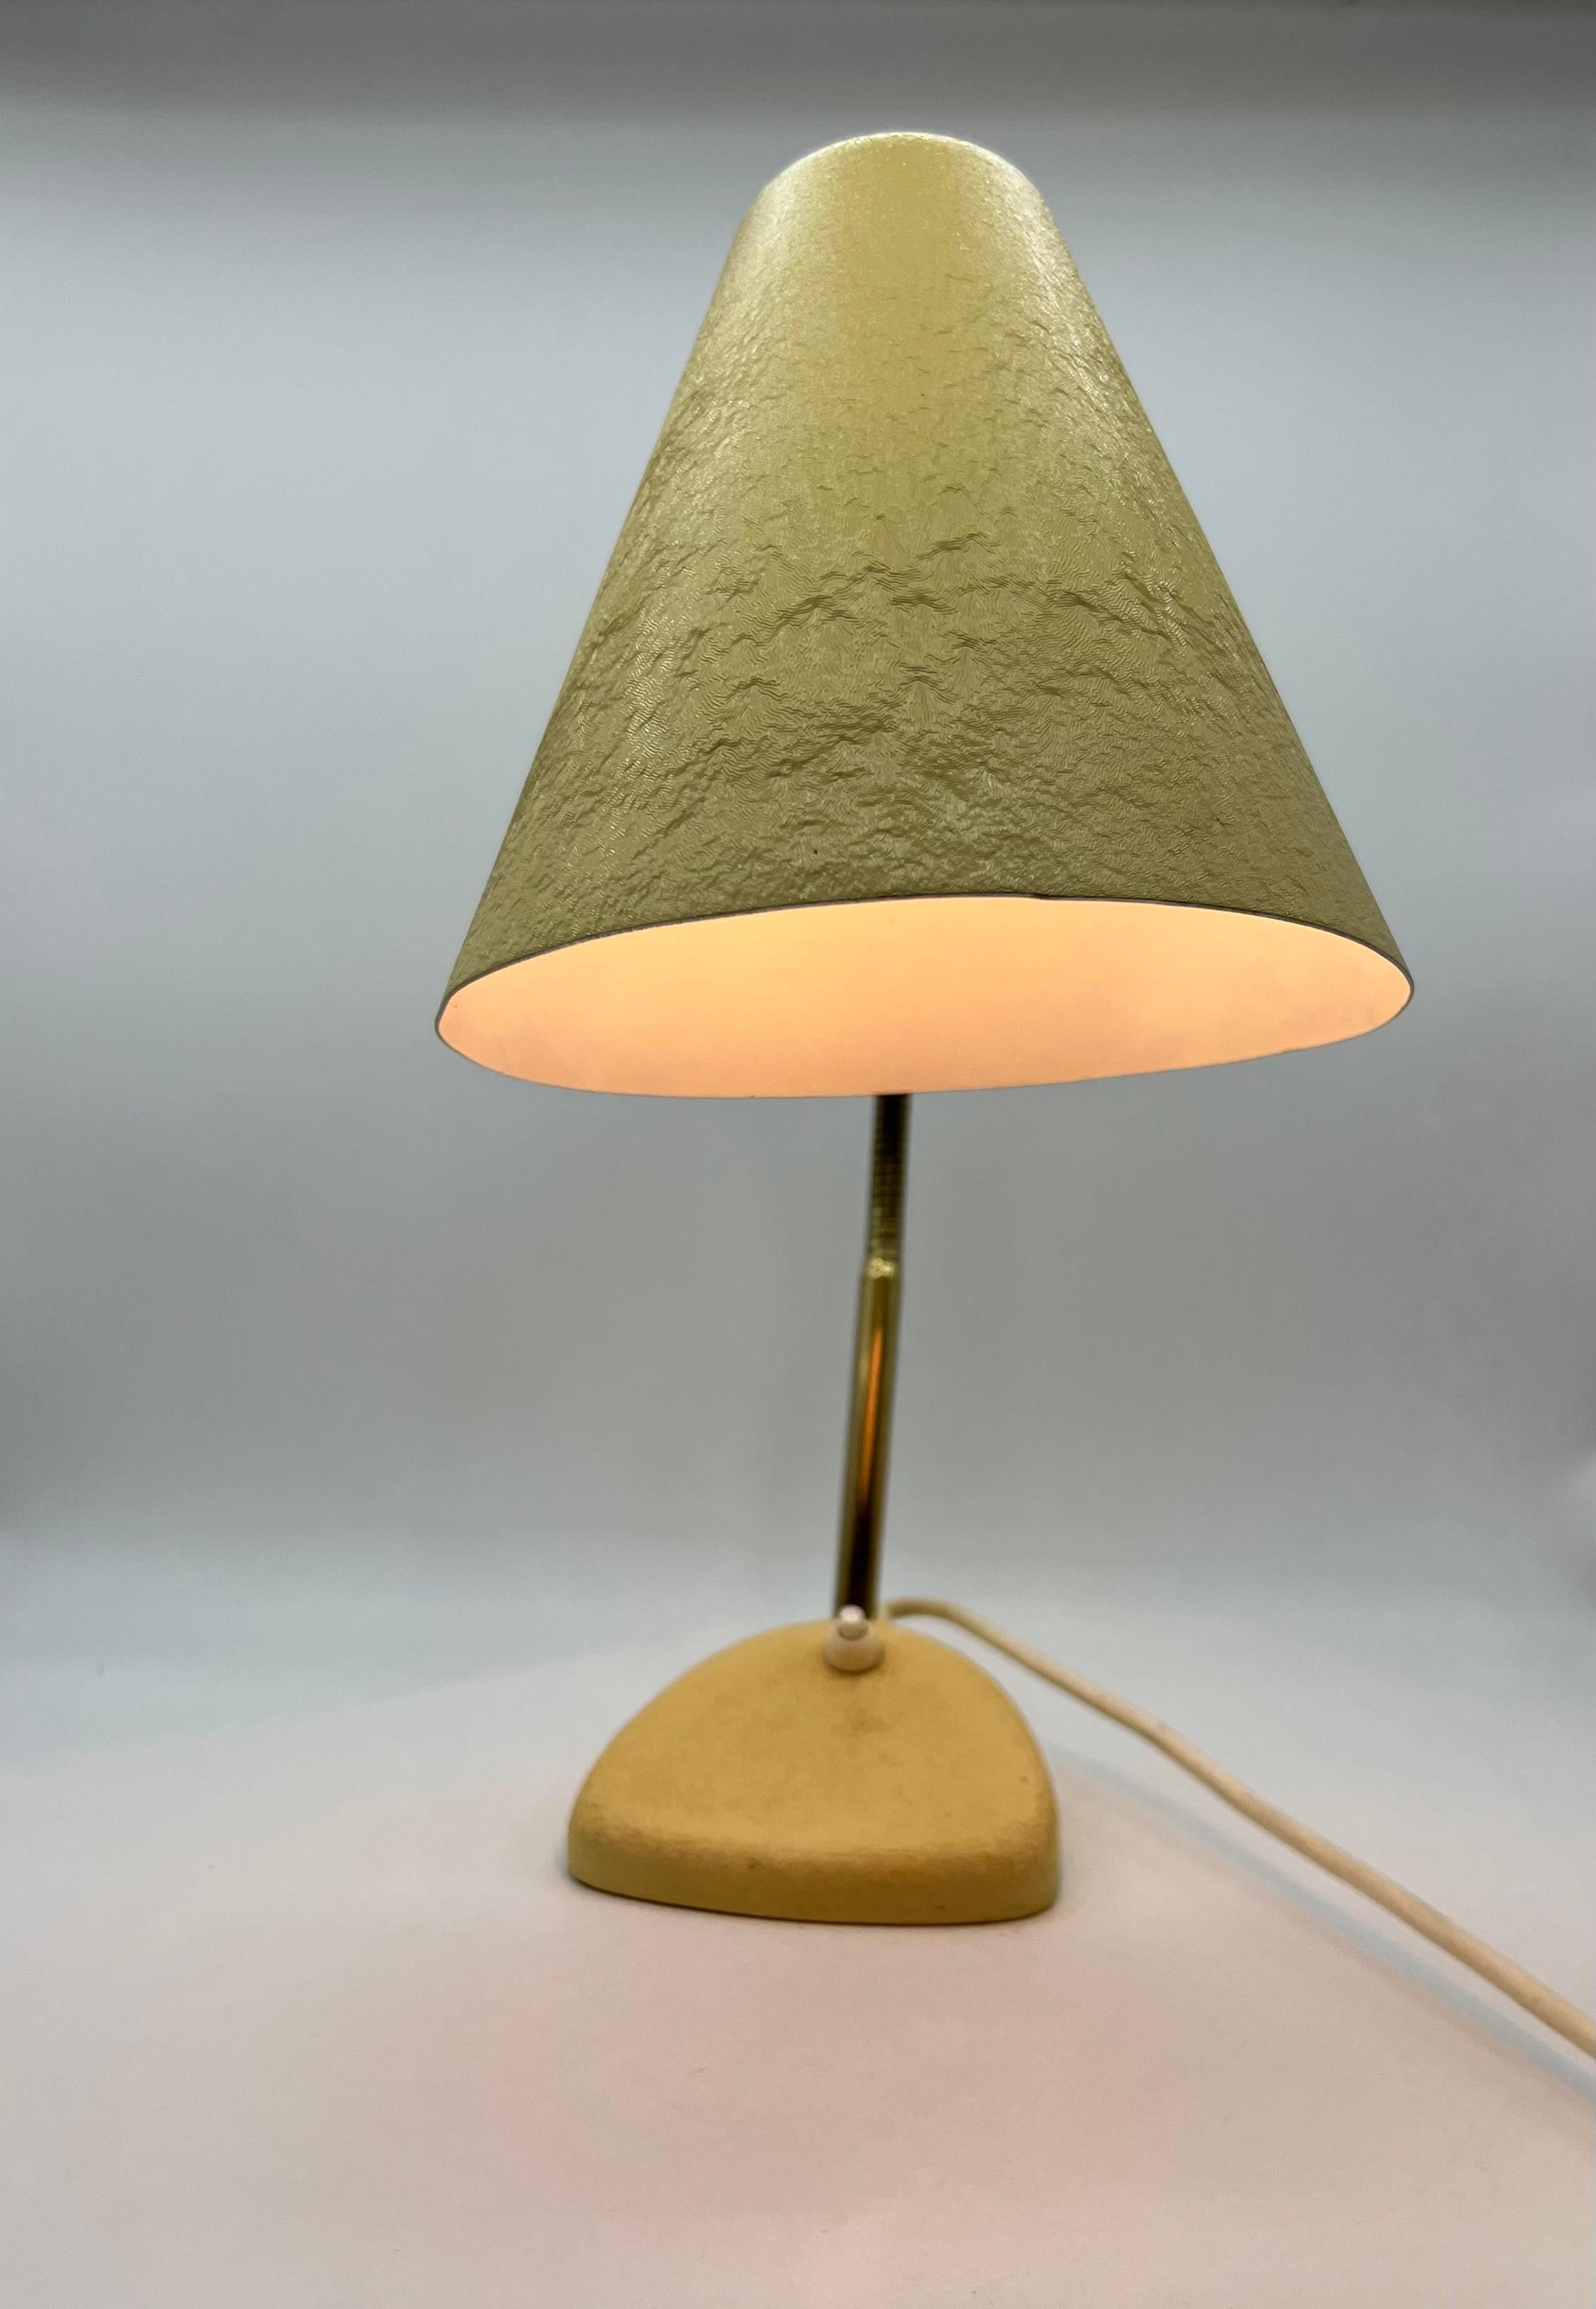 Yellow Table Lamp with Shrink Varnish and Movable Shade, Mid-20th Century For Sale 4